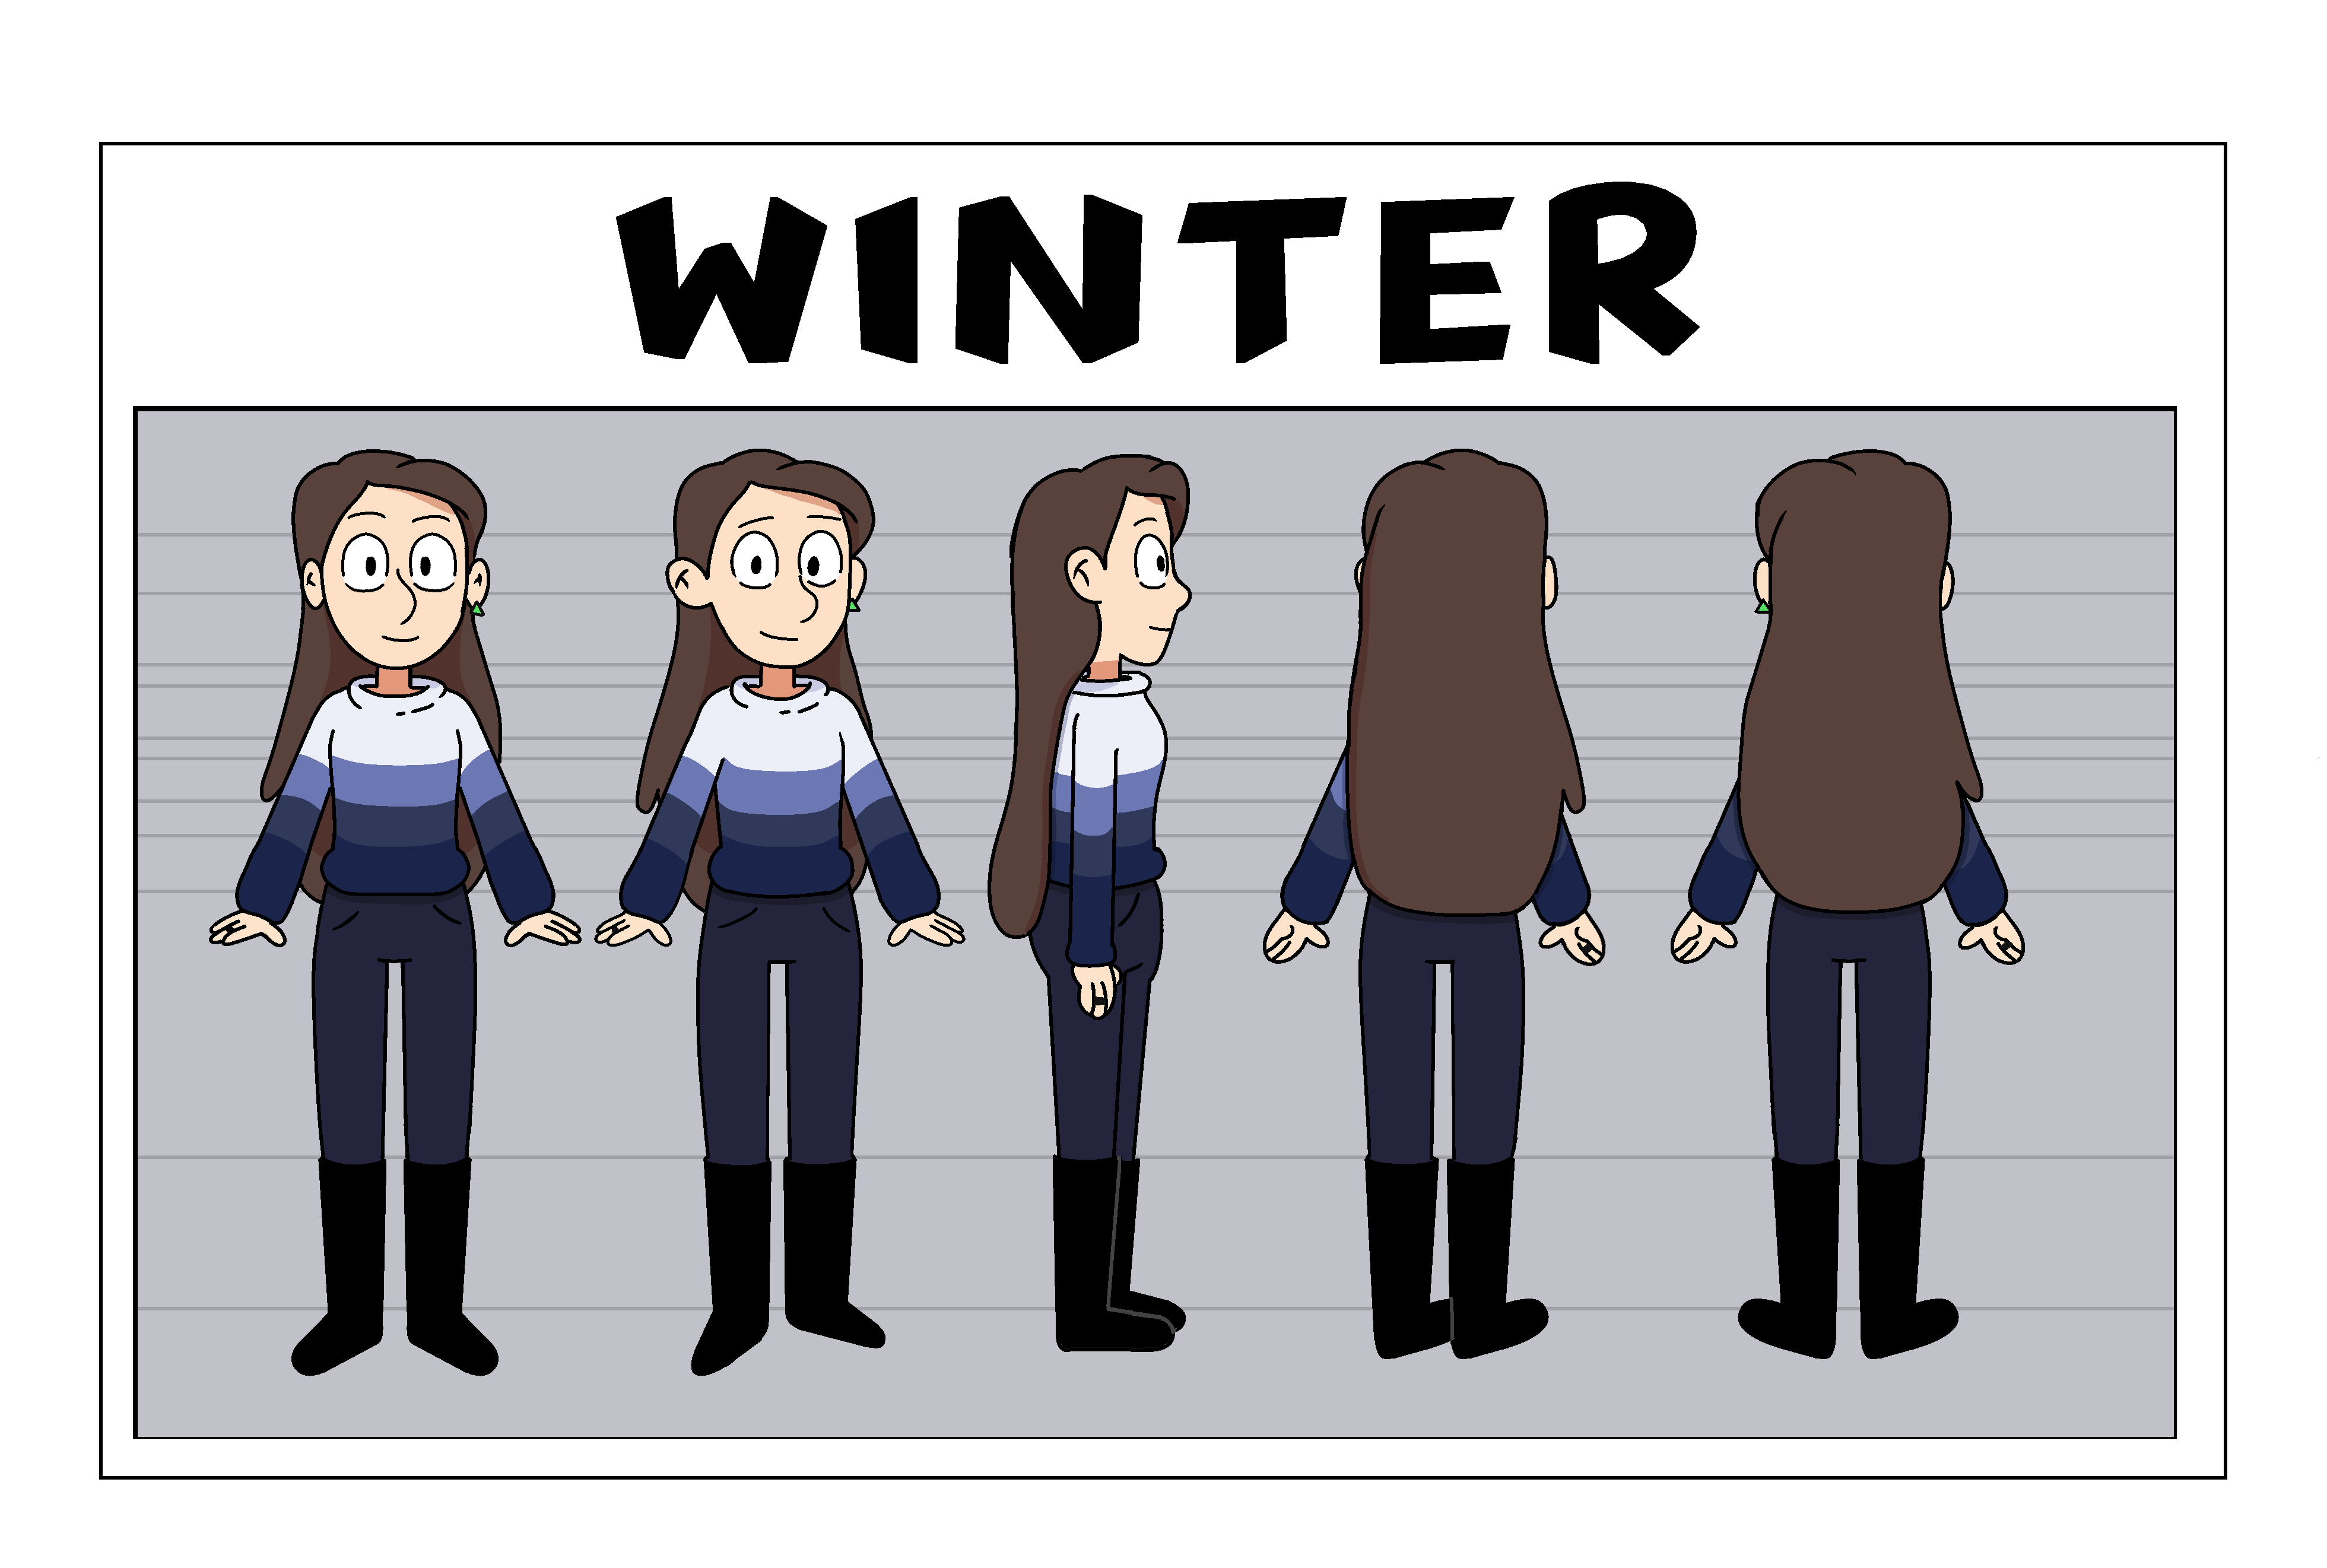 a reference guide for an OC called Winter